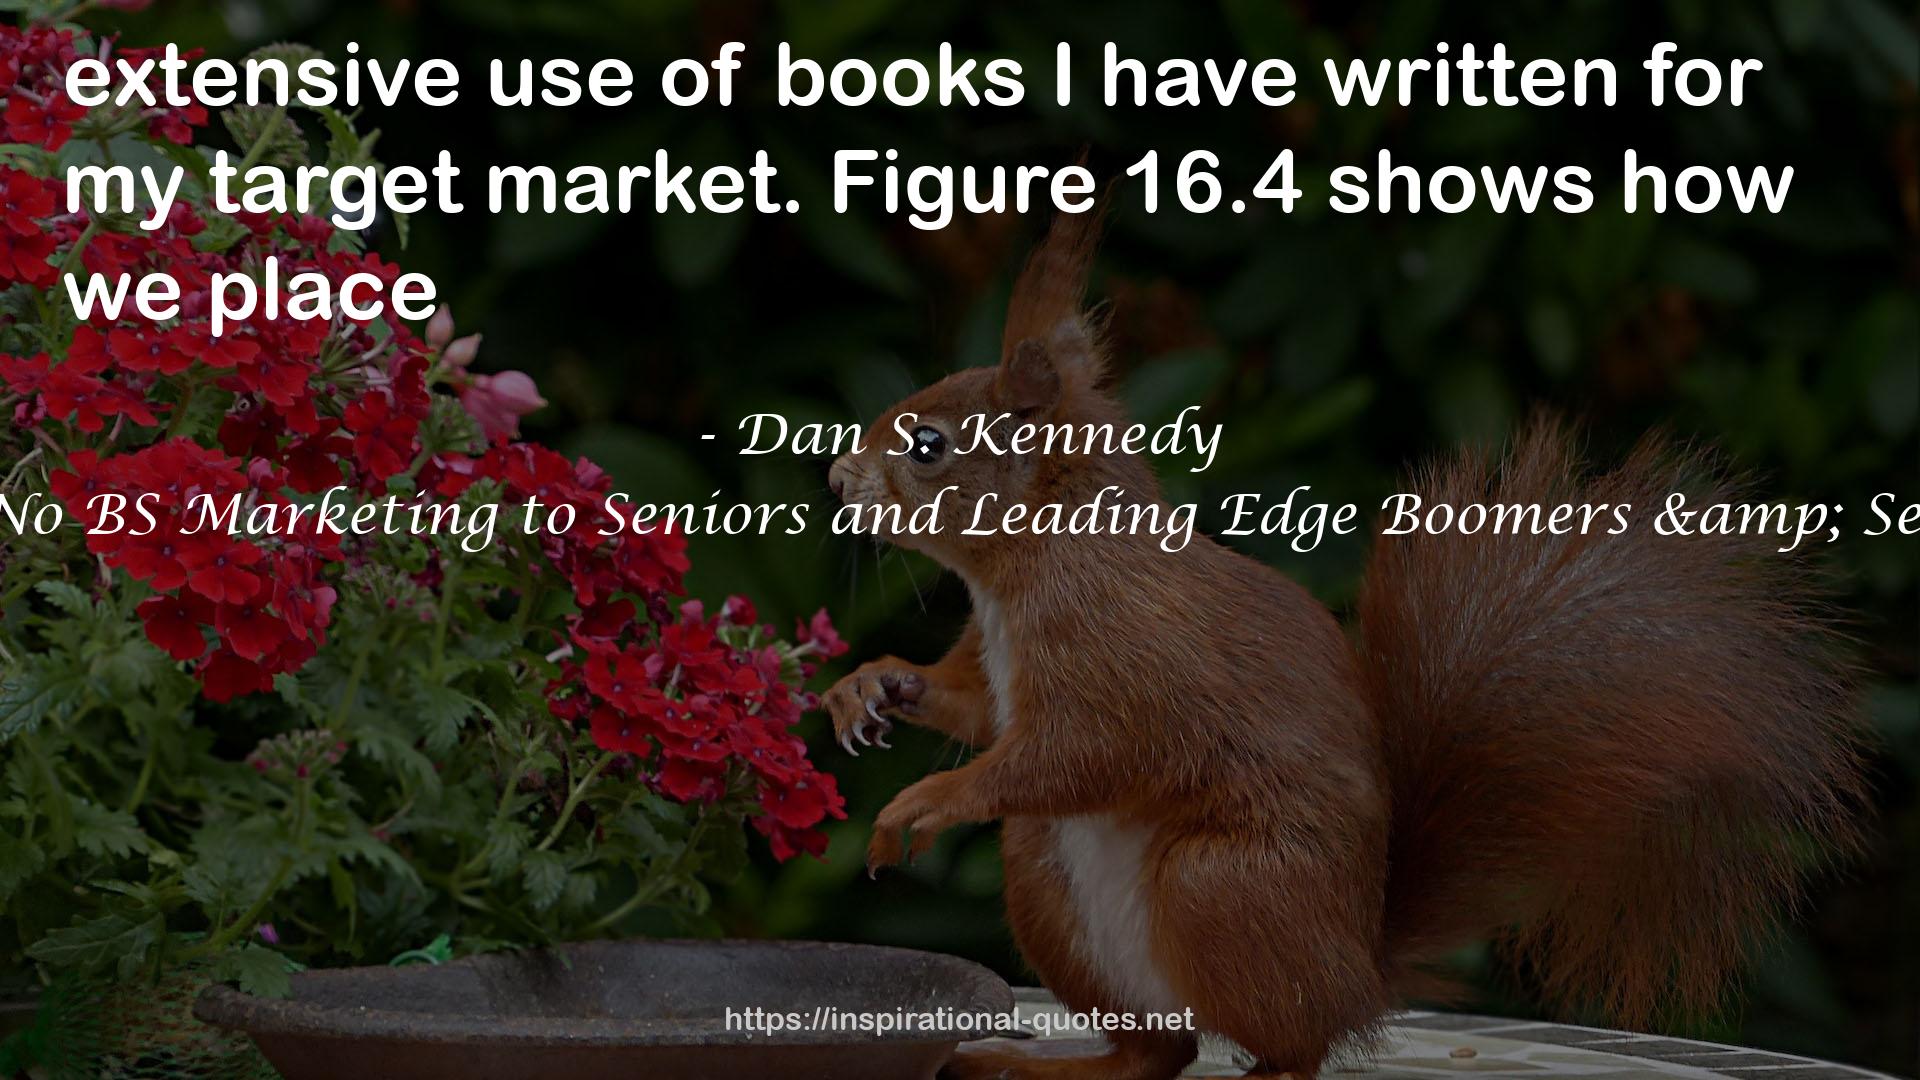 The No BS Marketing to Seniors and Leading Edge Boomers & Seniors QUOTES